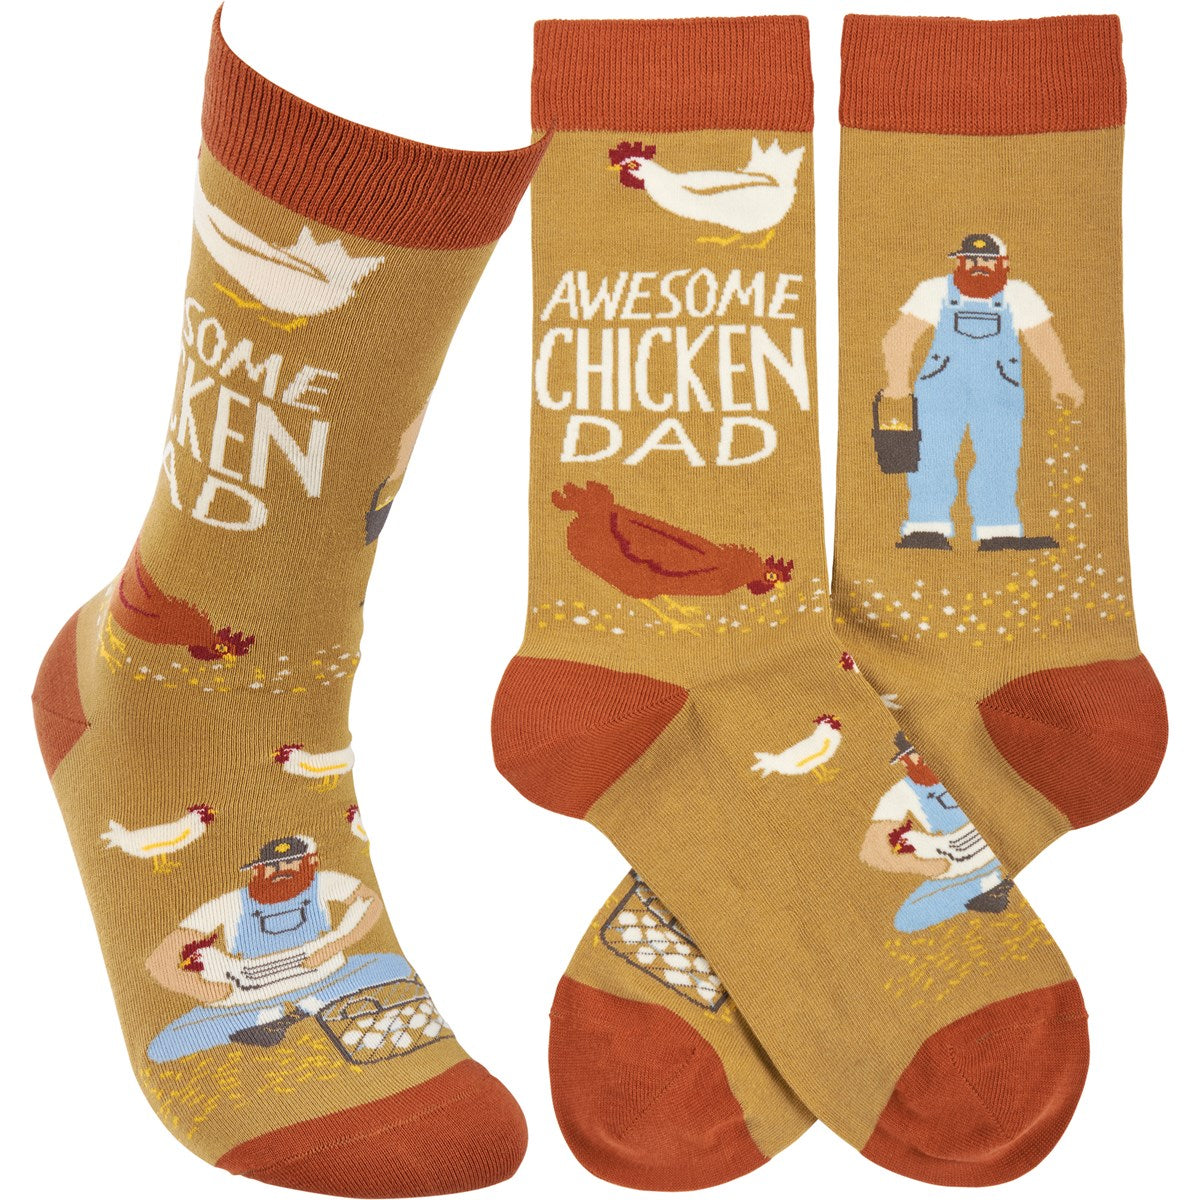 Awesome Chicken Dad Fun Novelty Socks